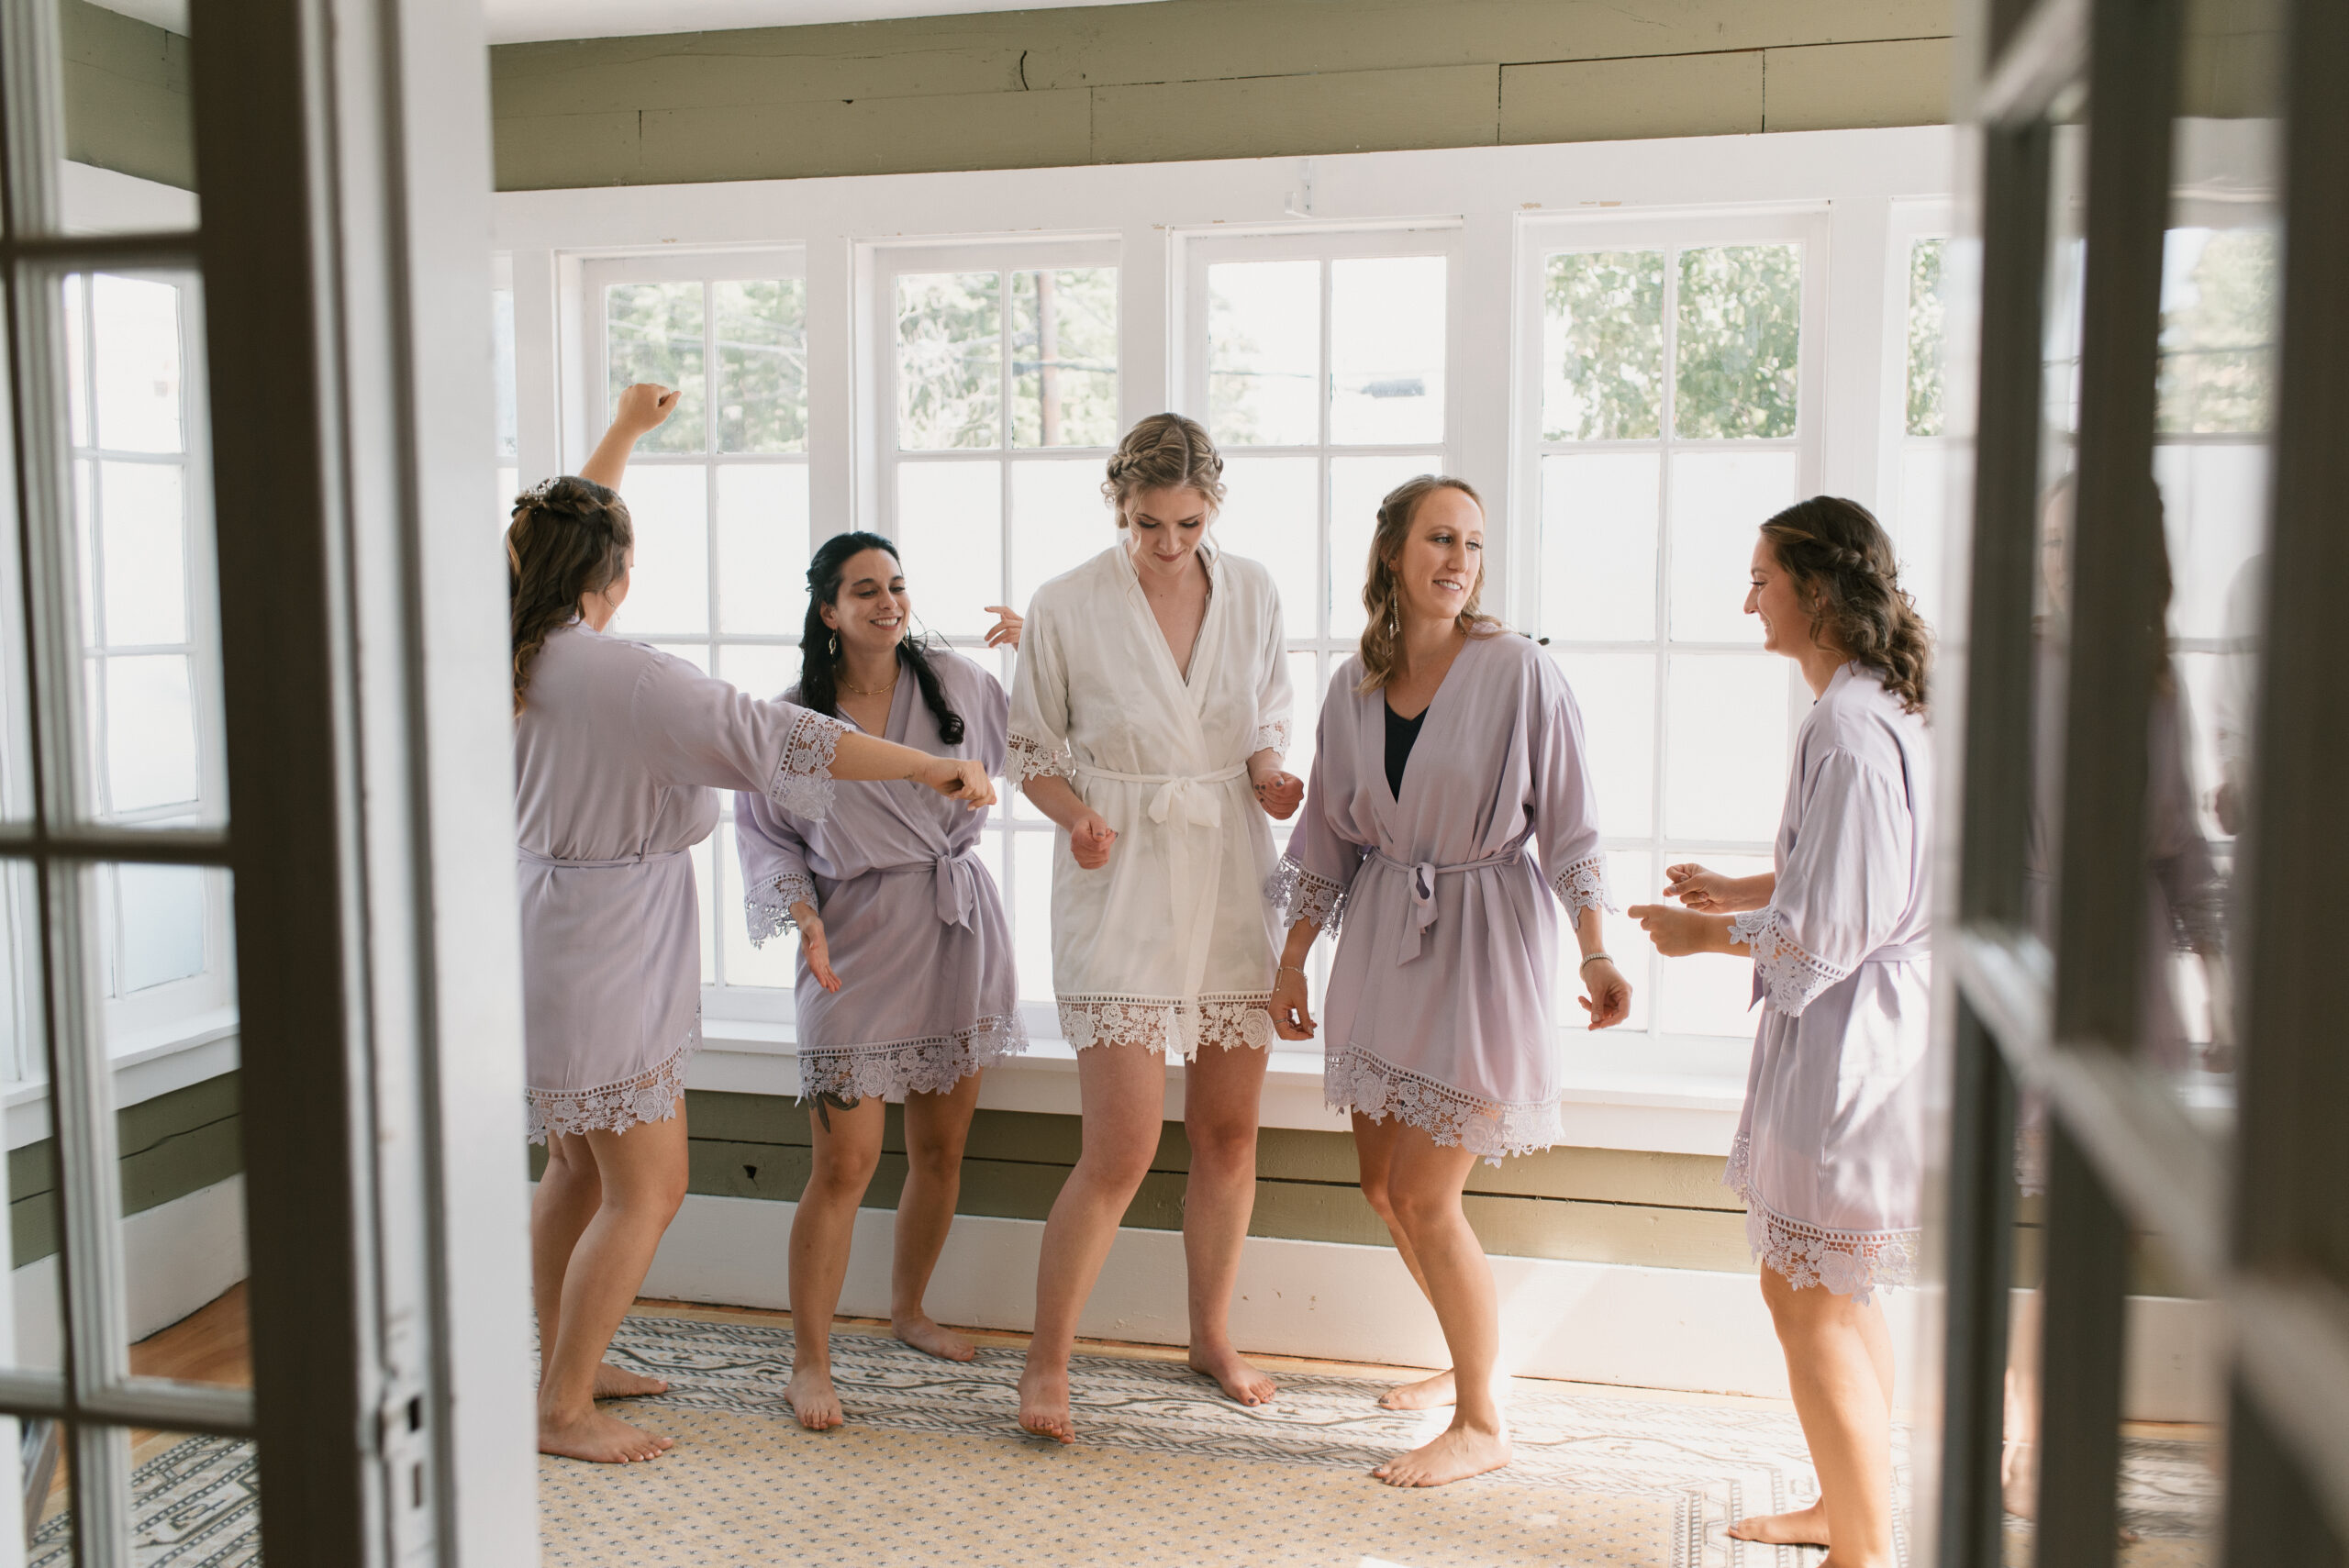 candid wedding photography of bride and bridesmaids dancing while getting ready